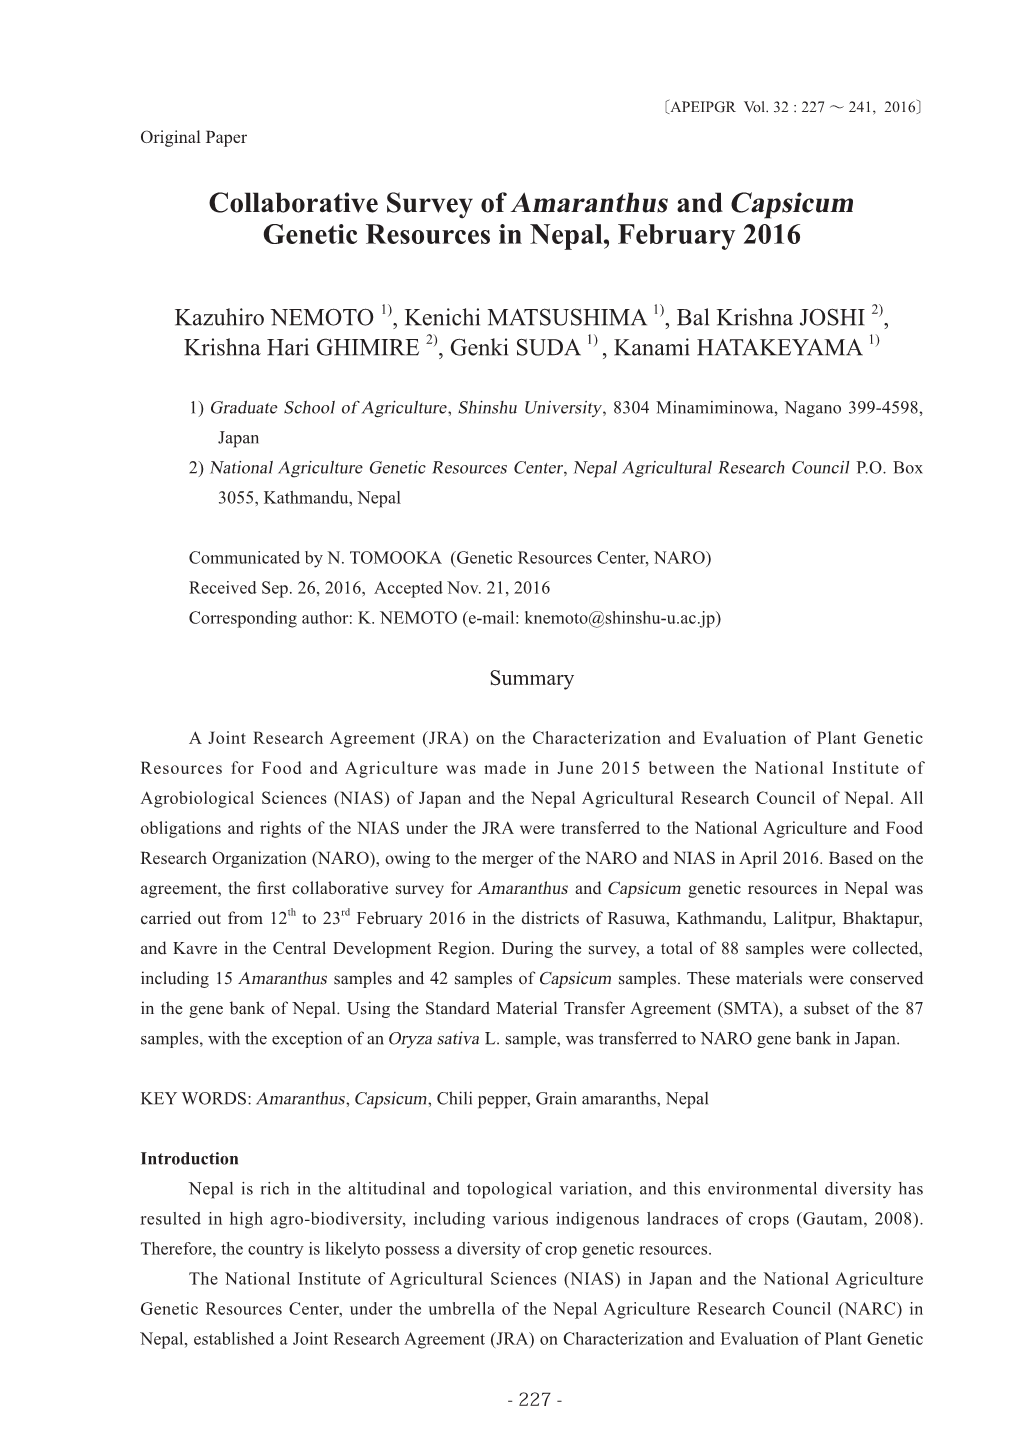 Collaborative Survey of Amaranthus and Capsicum Genetic Resources in Nepal, February 2016